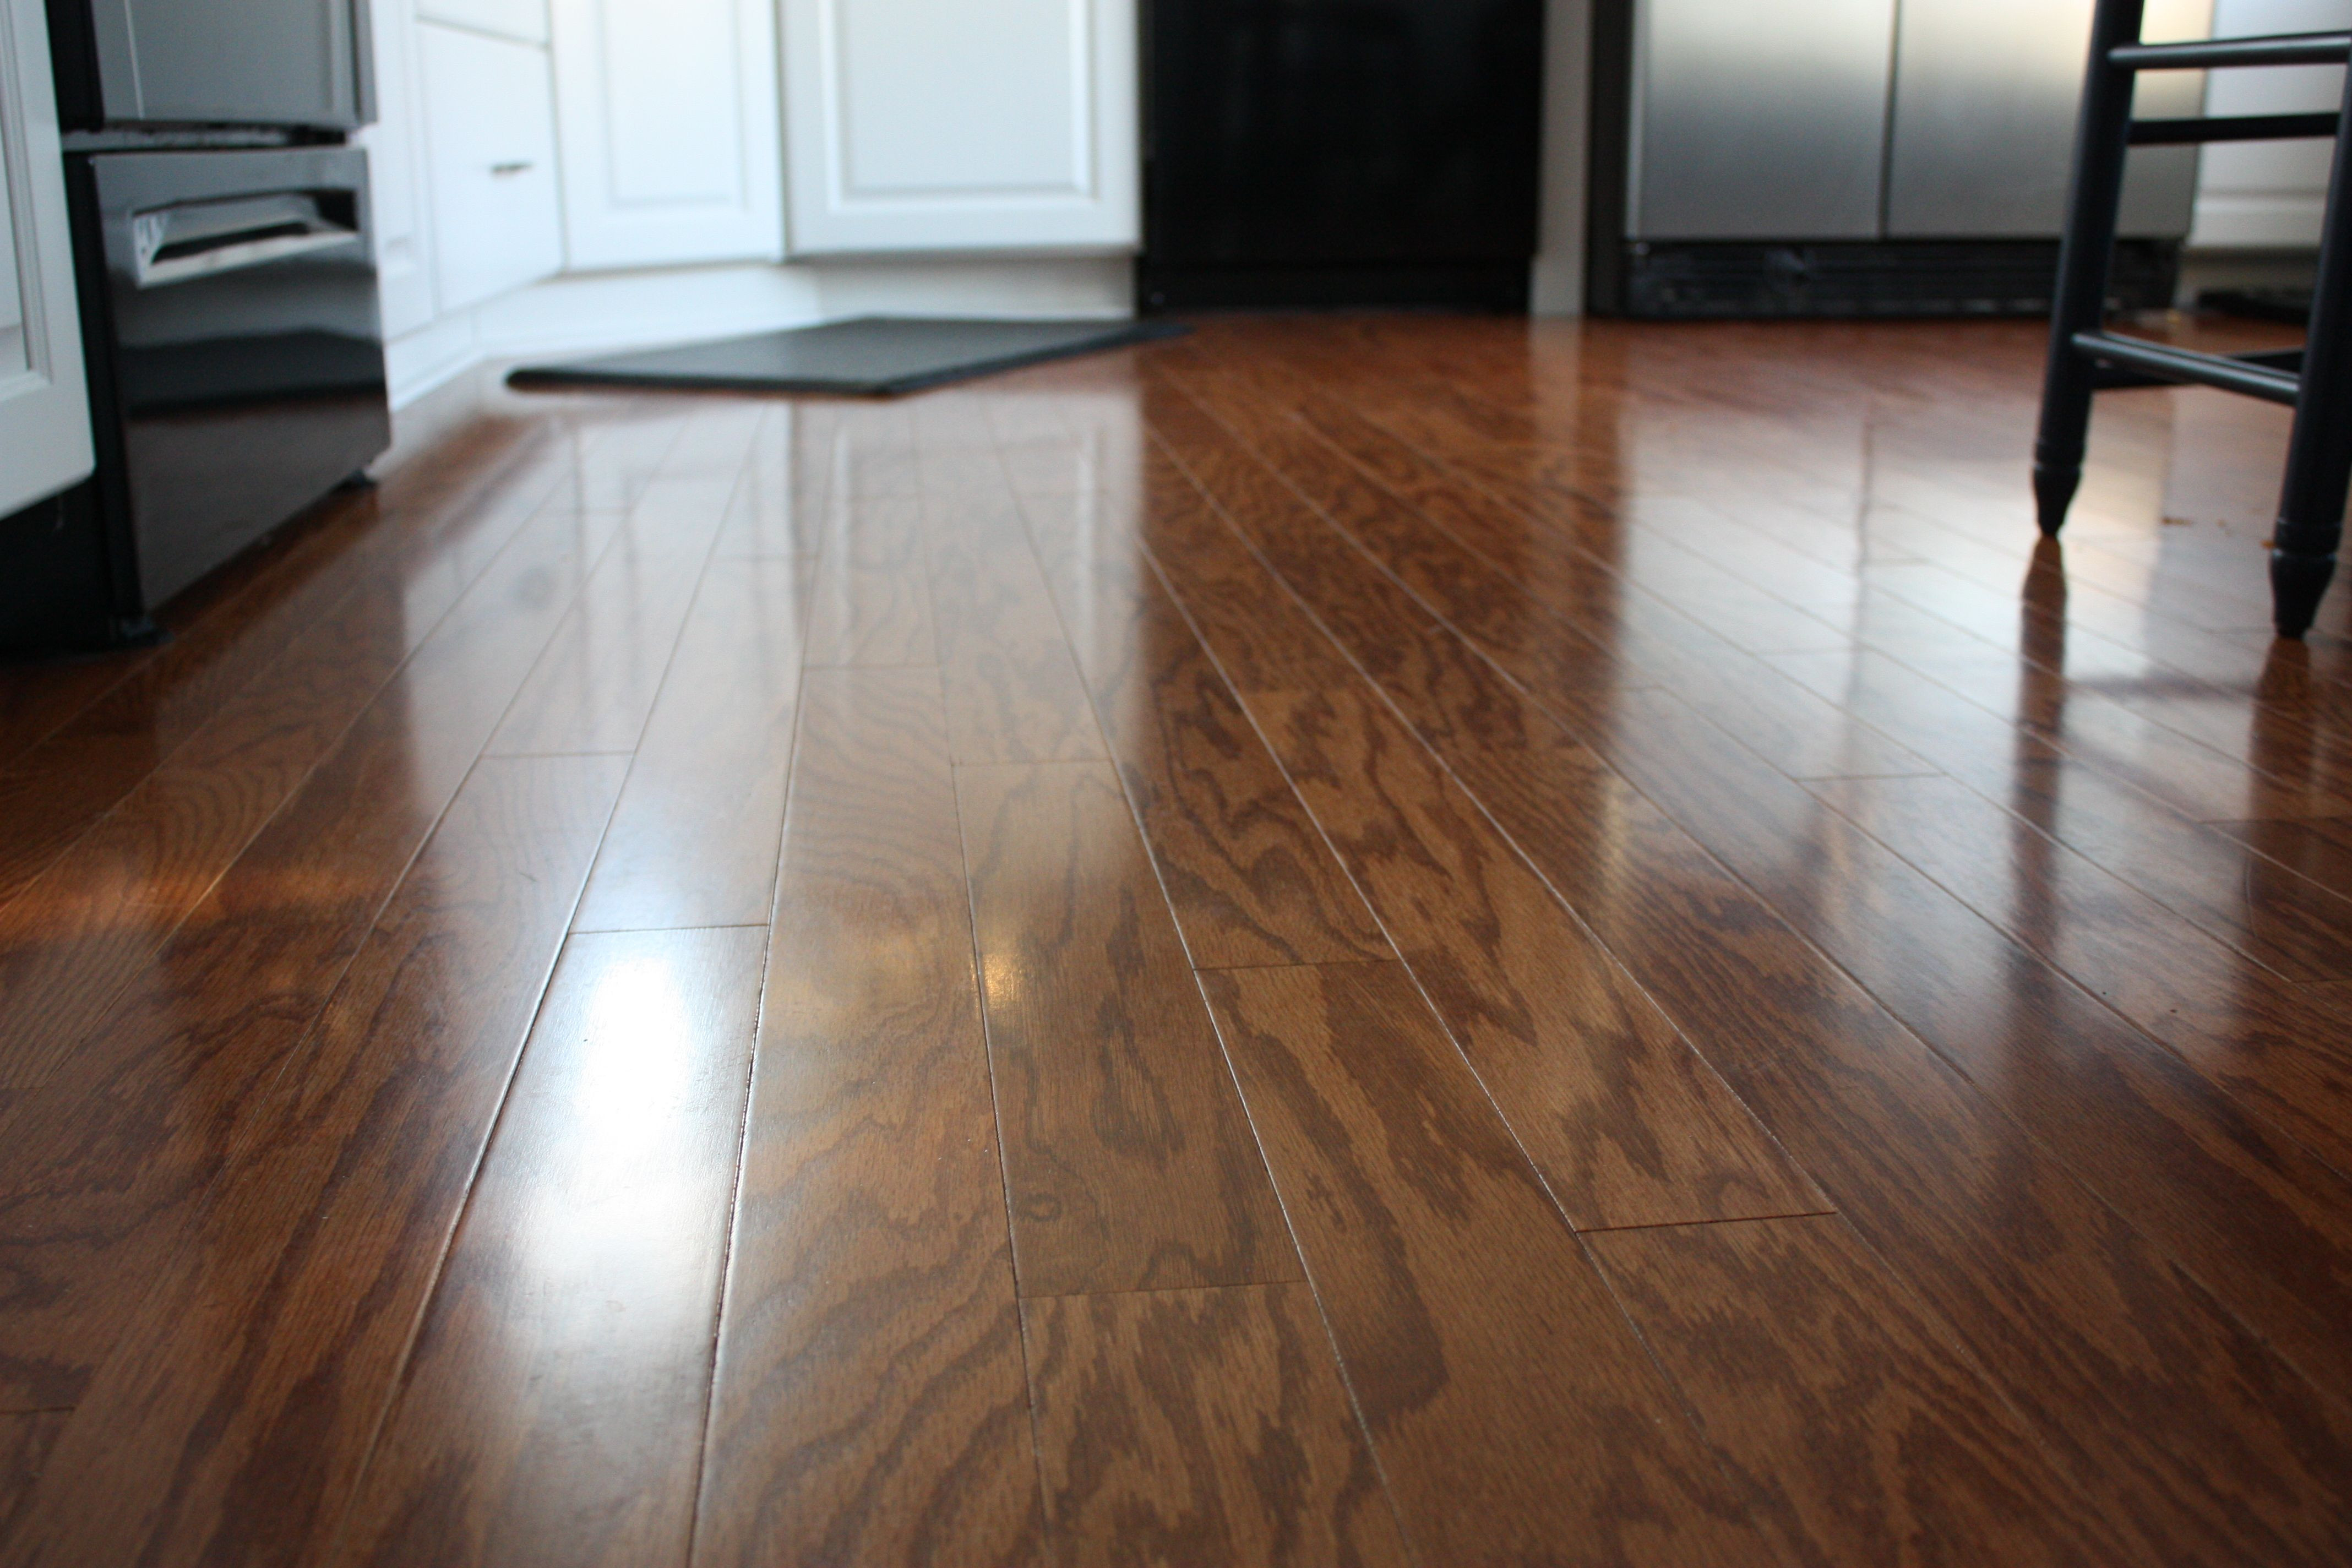 28 Famous Hardwood Floor solutions 2022 free download hardwood floor solutions of house of order tip 2 focus on the floors cleaning pinterest intended for house of order tip 2 focus on the floors